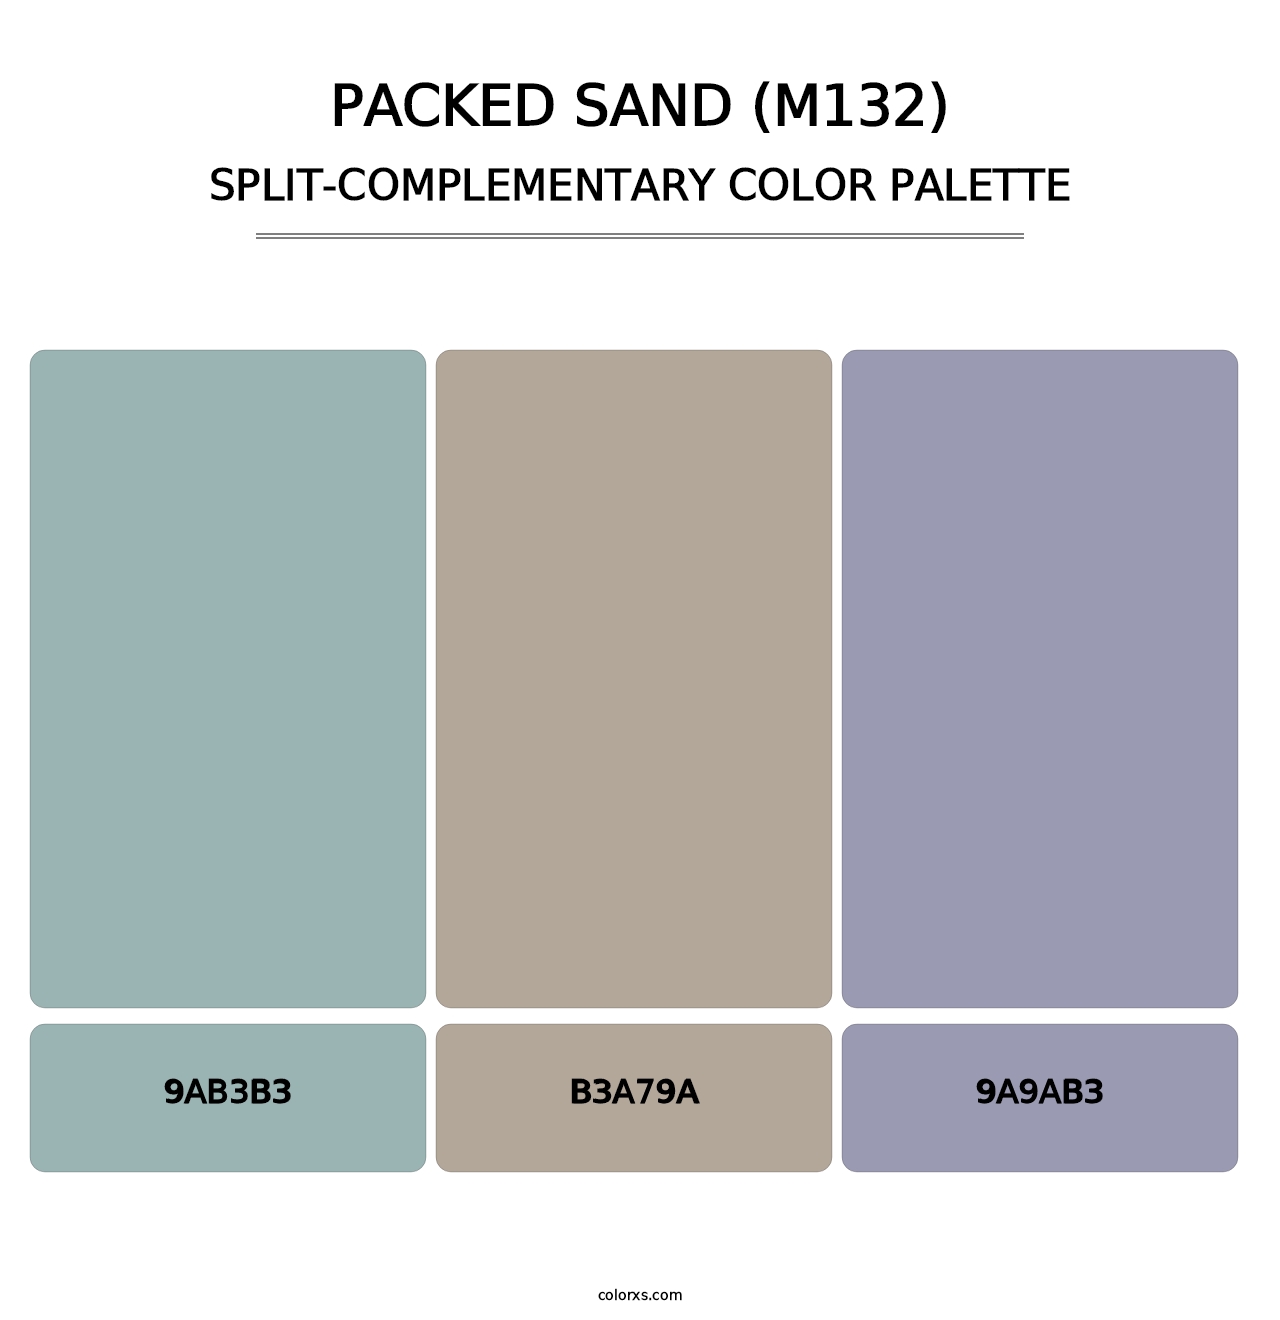 Packed Sand (M132) - Split-Complementary Color Palette